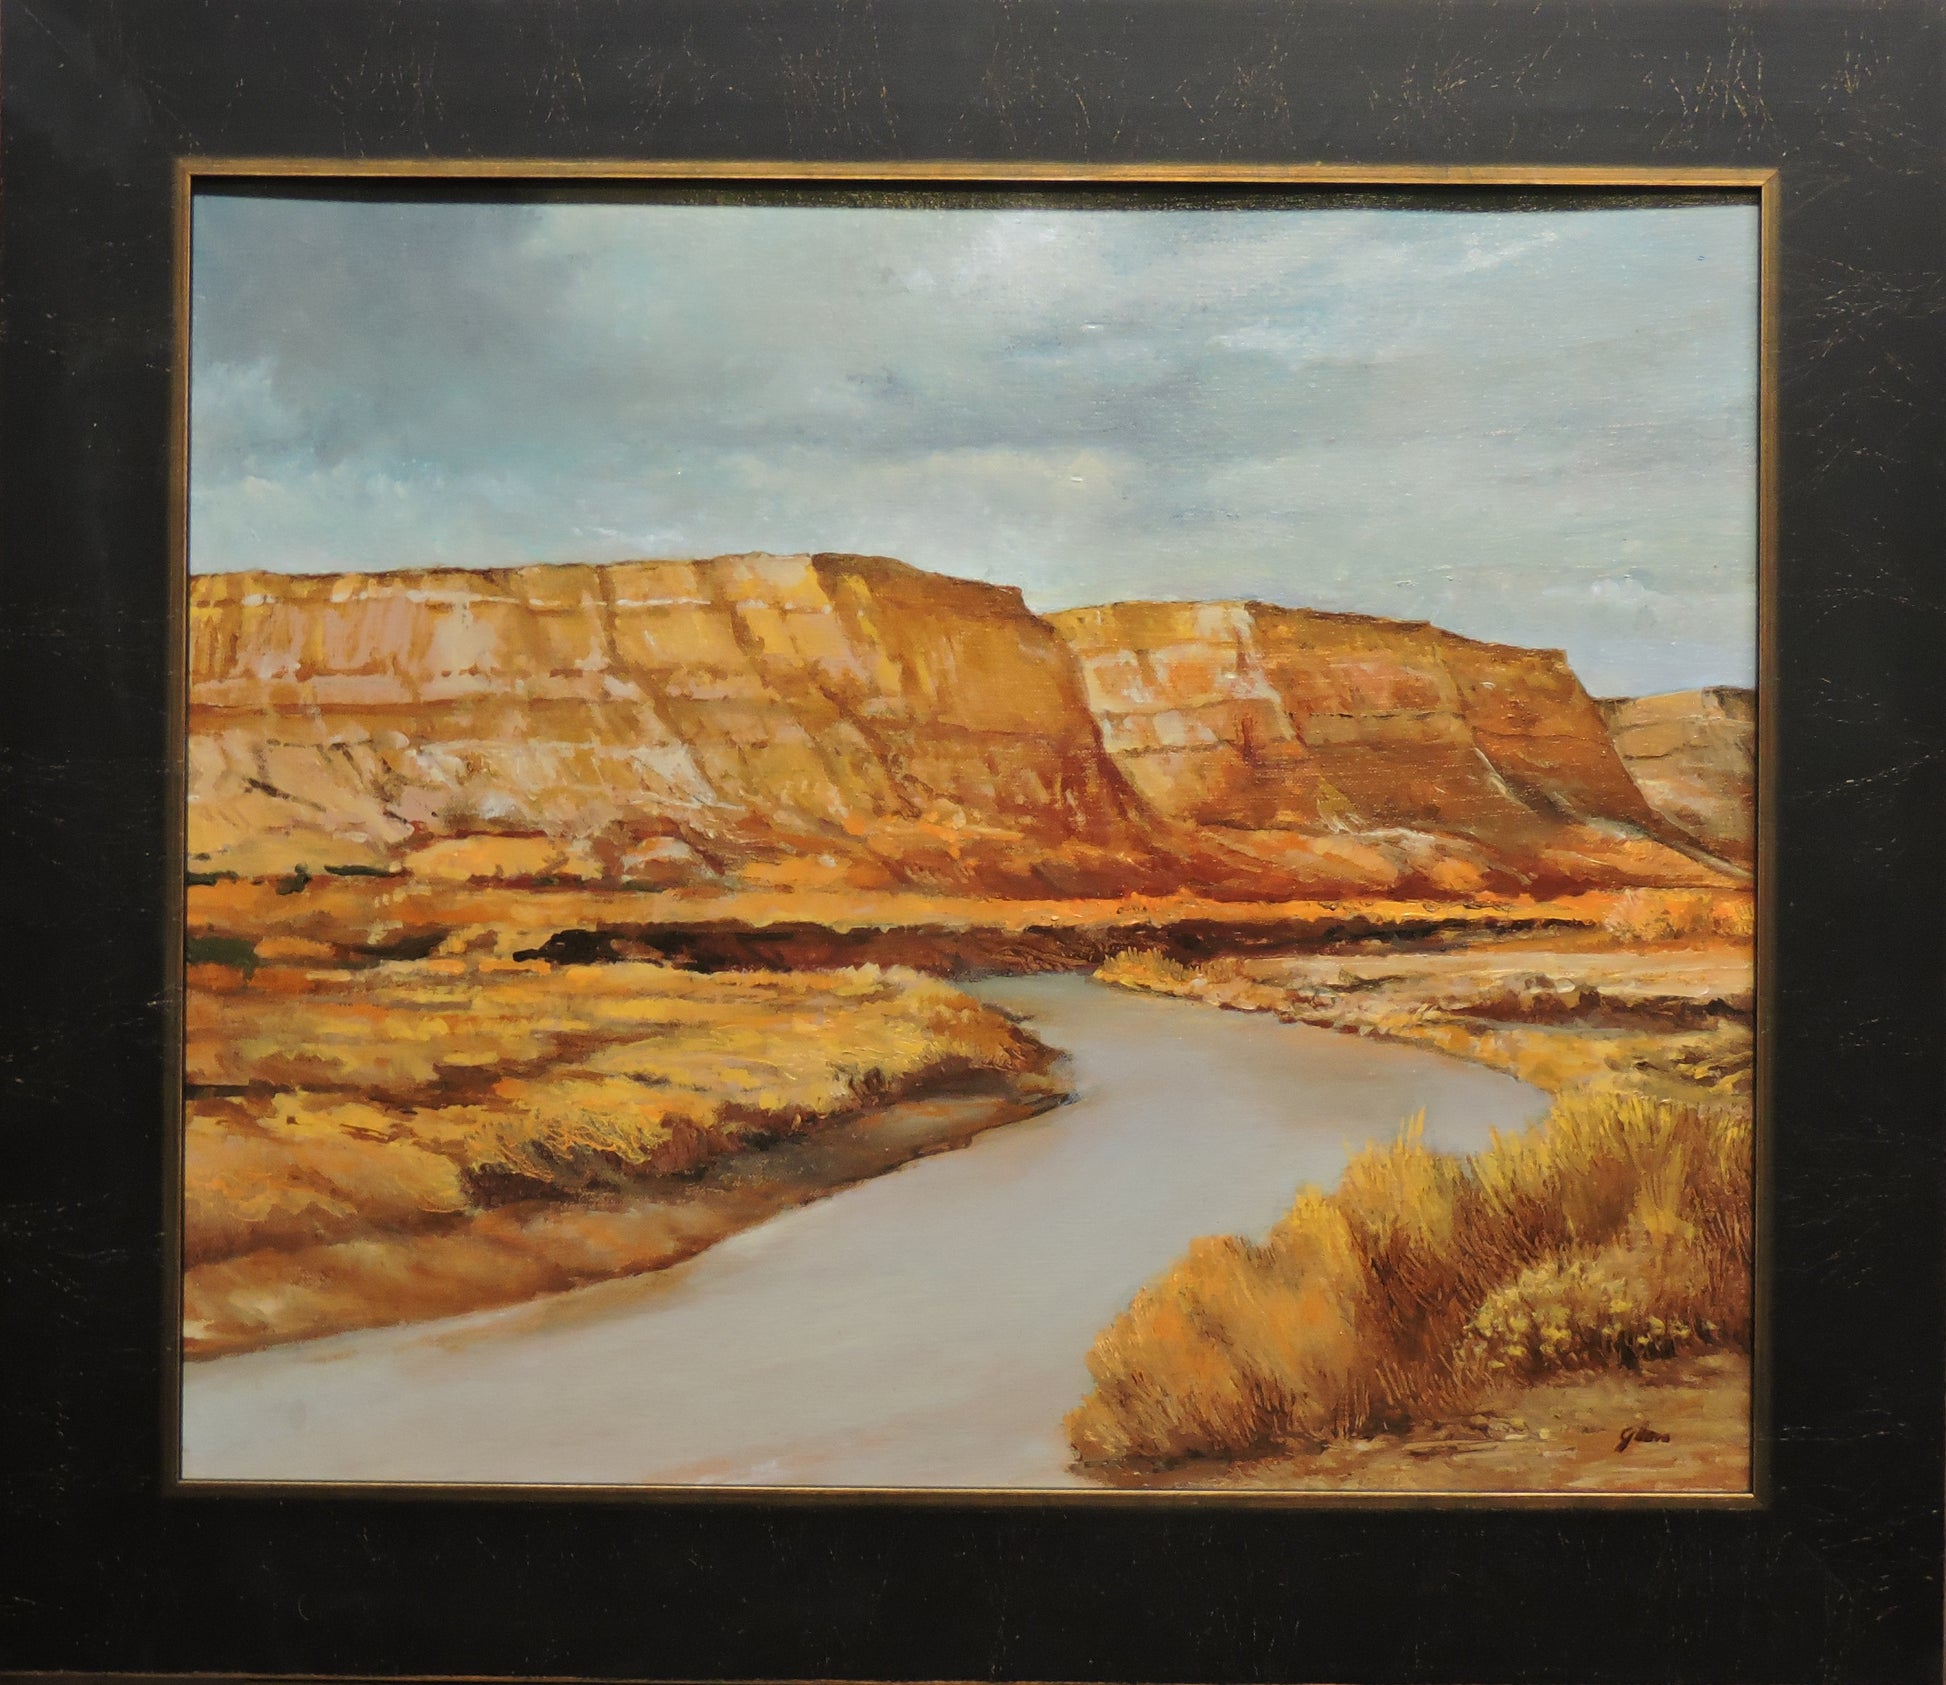 " A Bend In The River " Original Oil Painting Artist: Jerry Glass Original Oil Painting  Desert scene of a river and cliff  Looks like it could be from a river in Wyoming  Framed in a dark wooden frame with golden colored edges  Wire on the back for hanging  17 1/2" long x 14 1/2" high painting  22" long x 19" high x 3/4" wide as framed